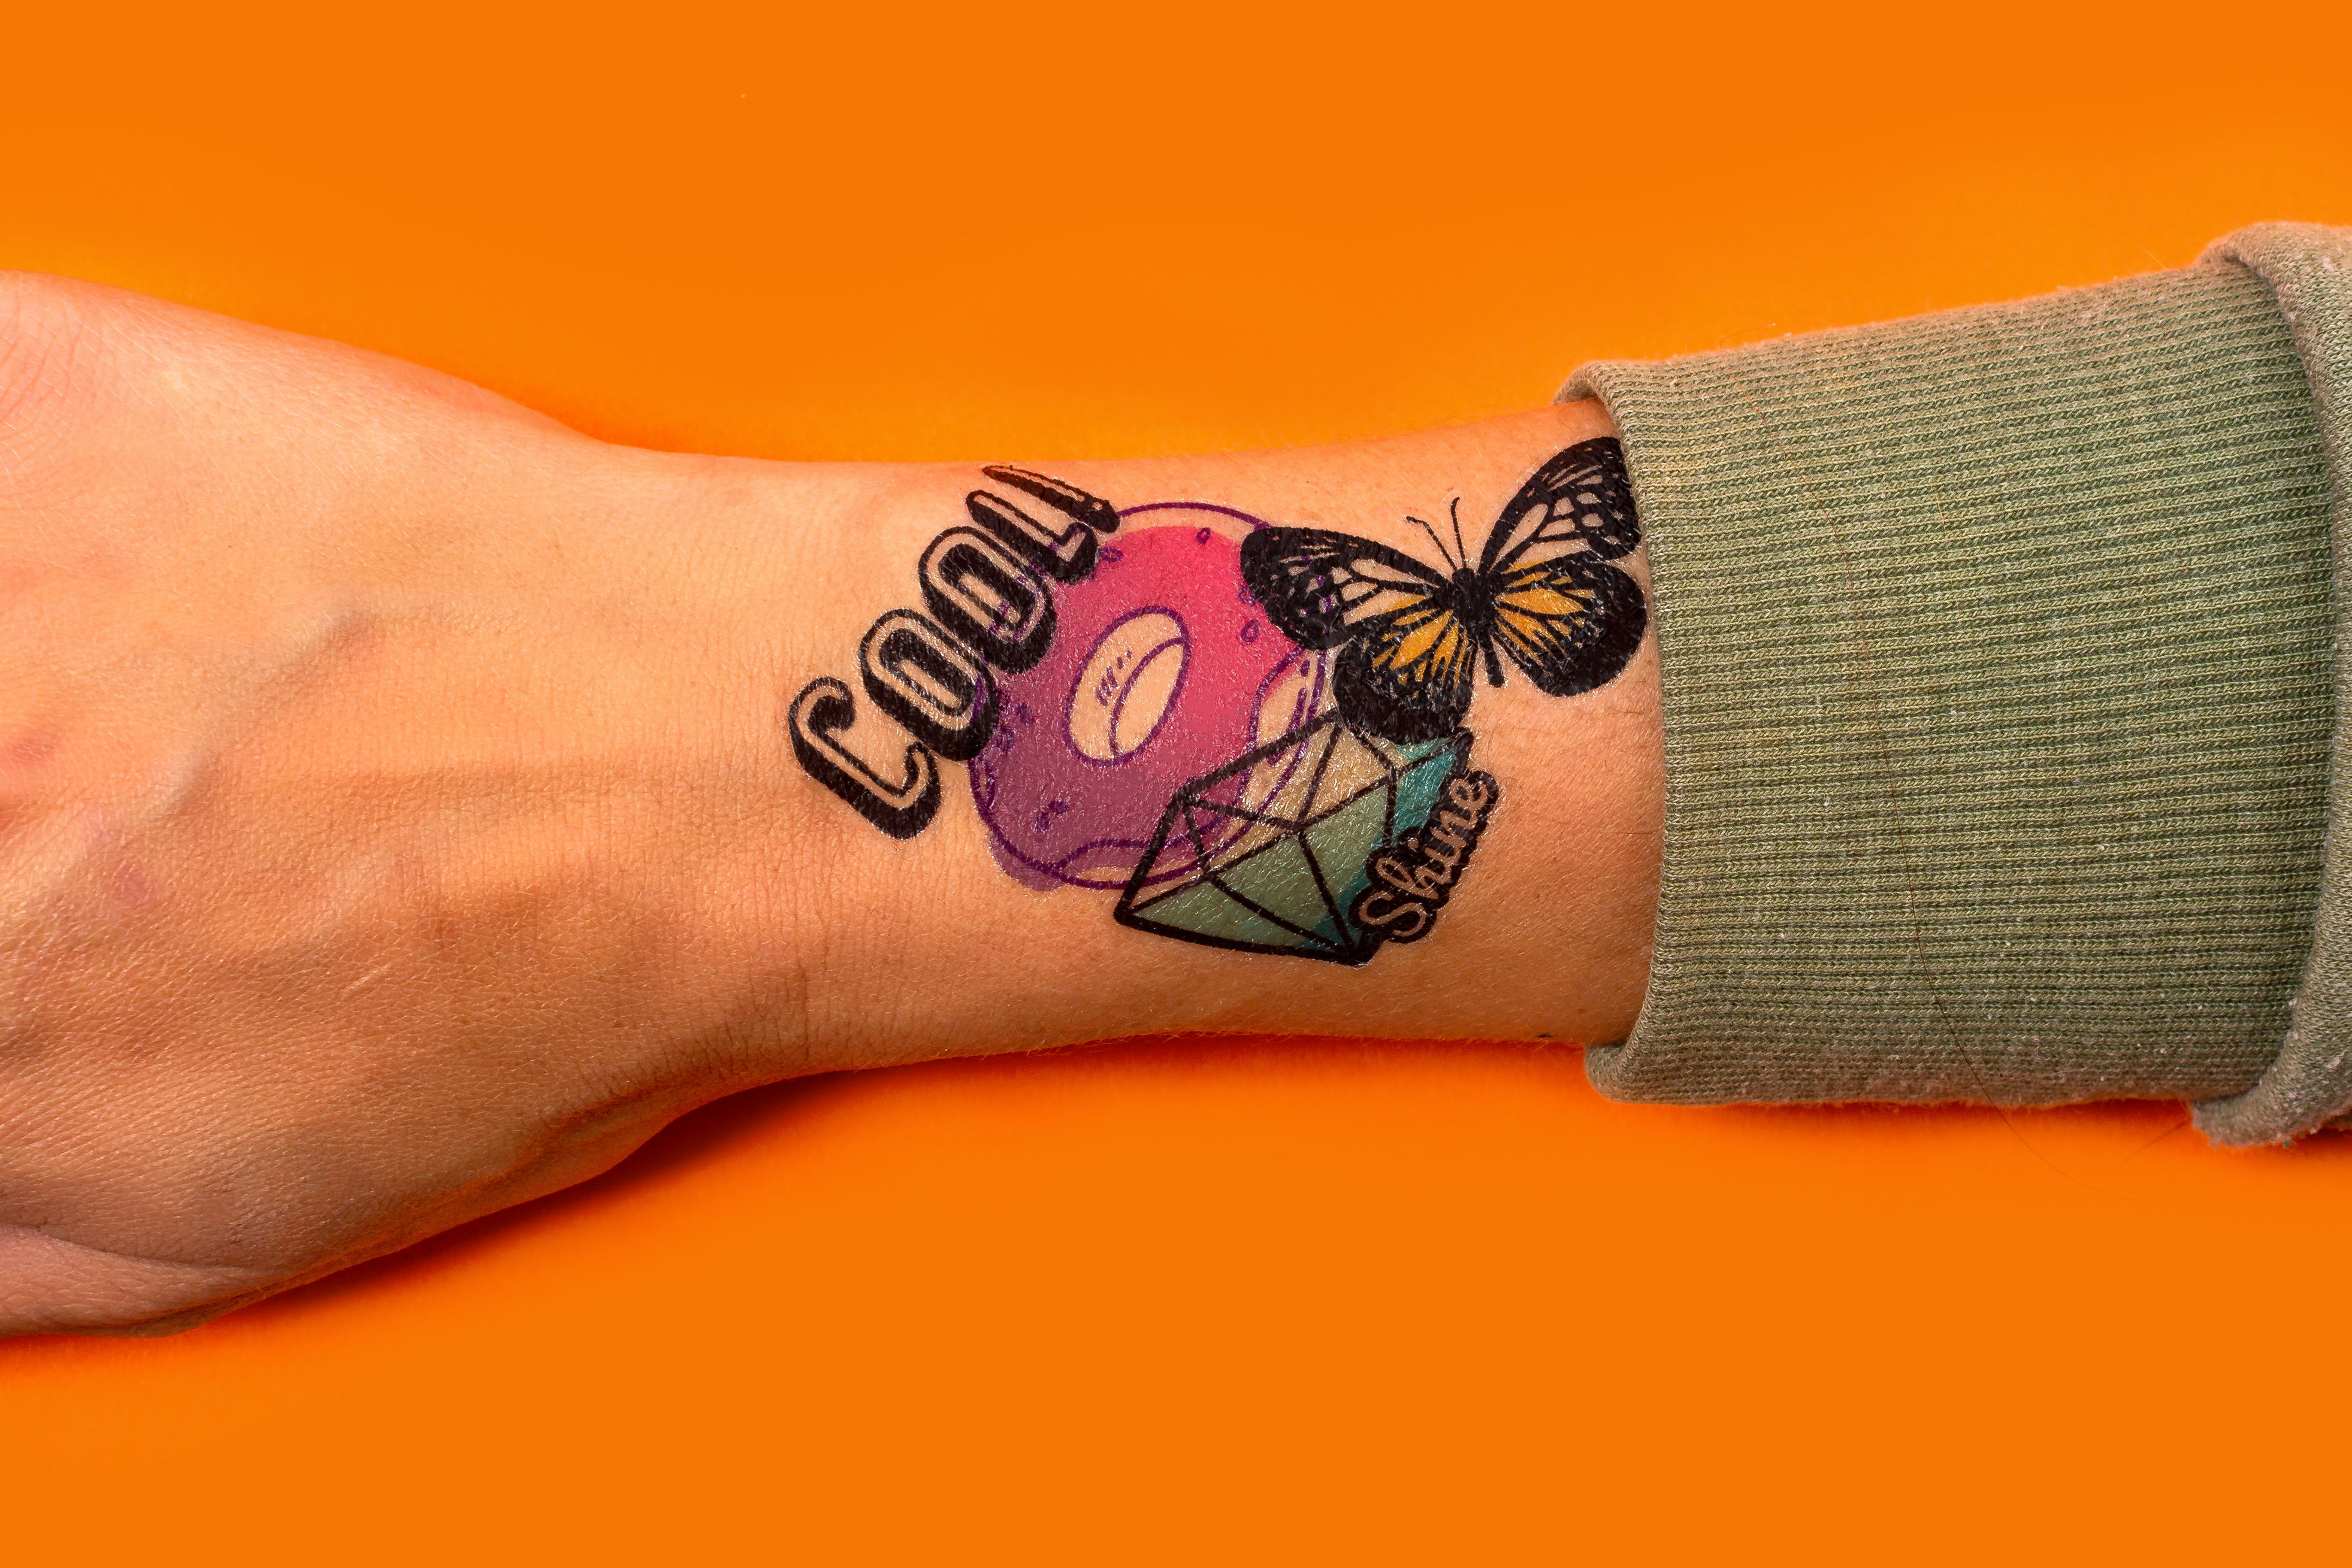 Can I layer one custom temporary tattoo over another?